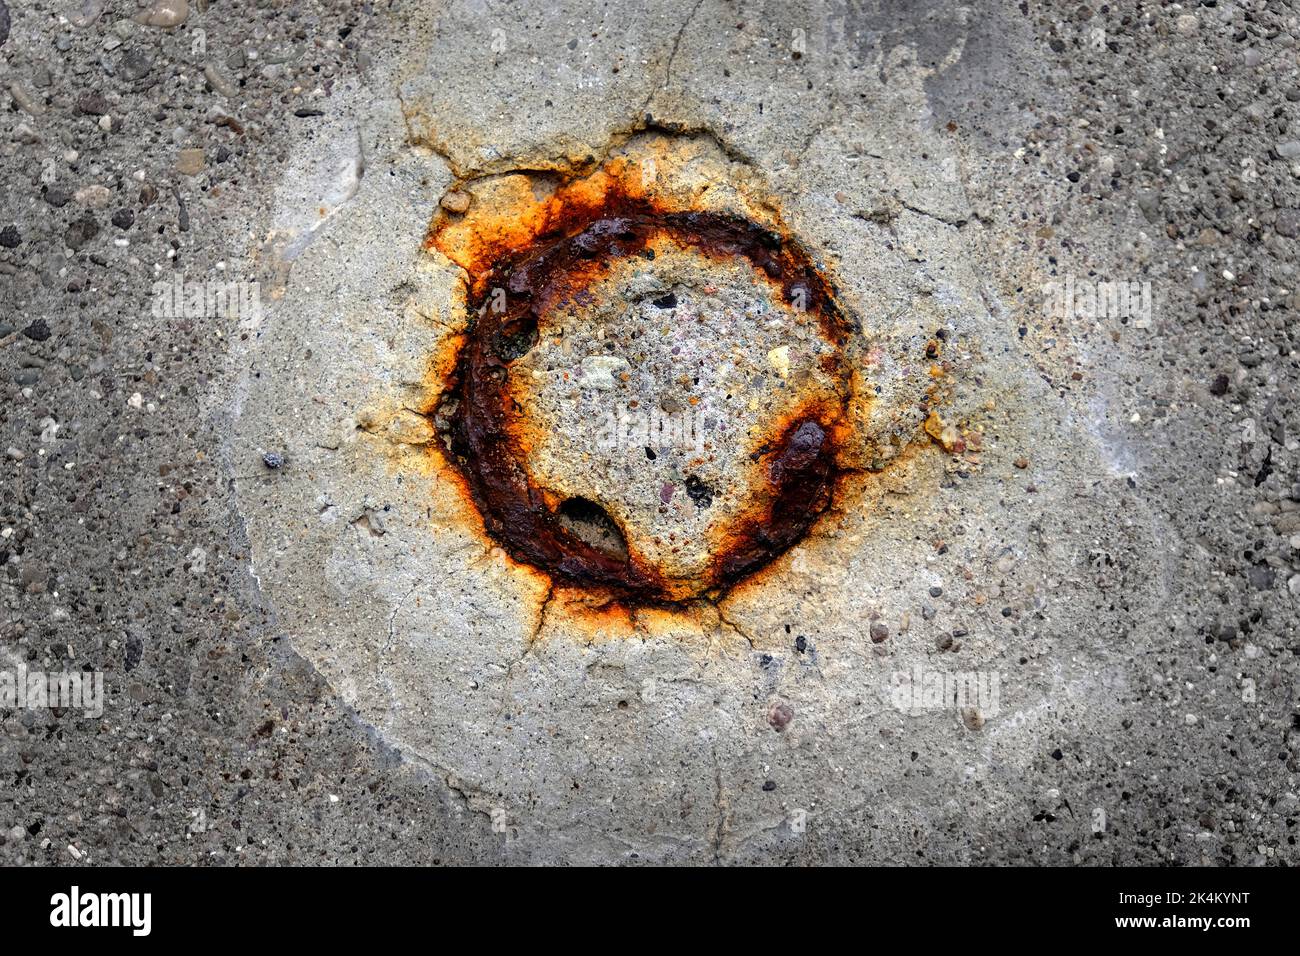 Orange rusted round spot on concrete texture from cut pole removed Stock Photo